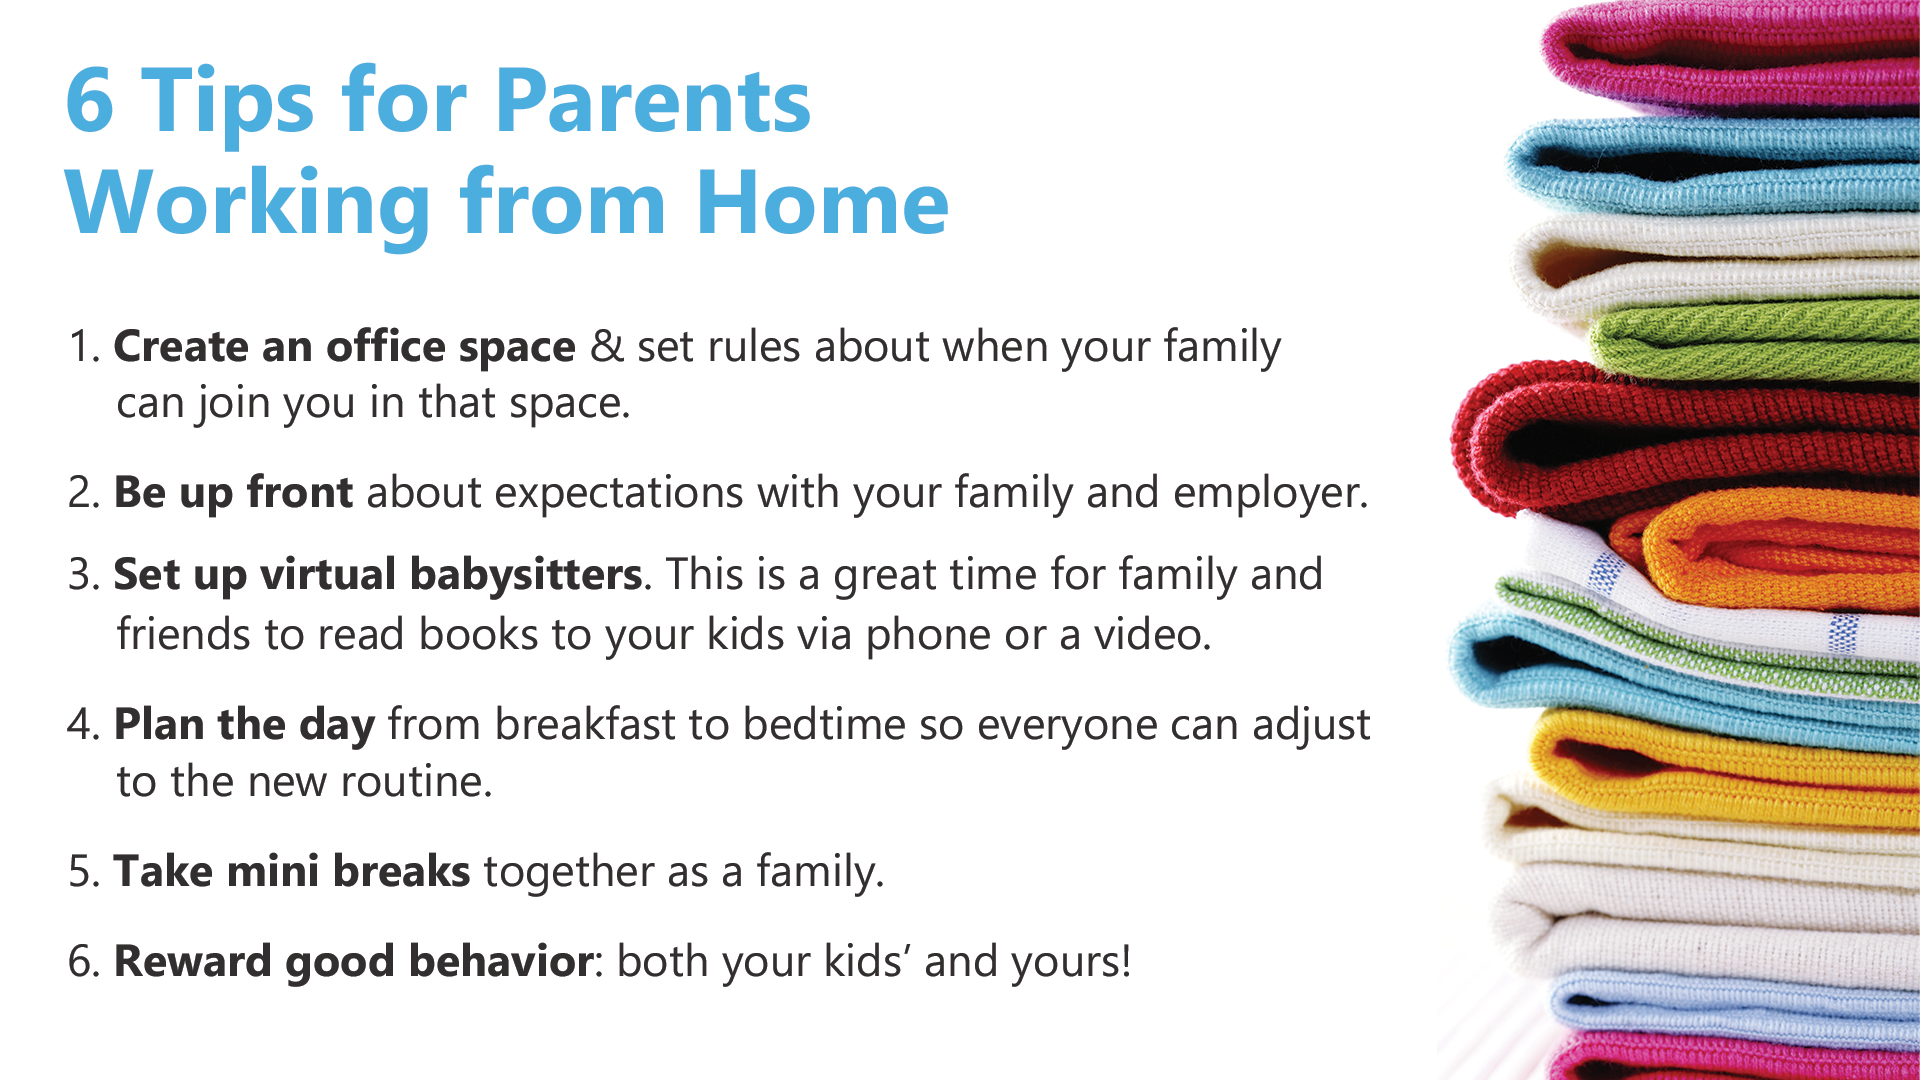 Free Graphic | Work from Home Tips | 6 Tips for Parents